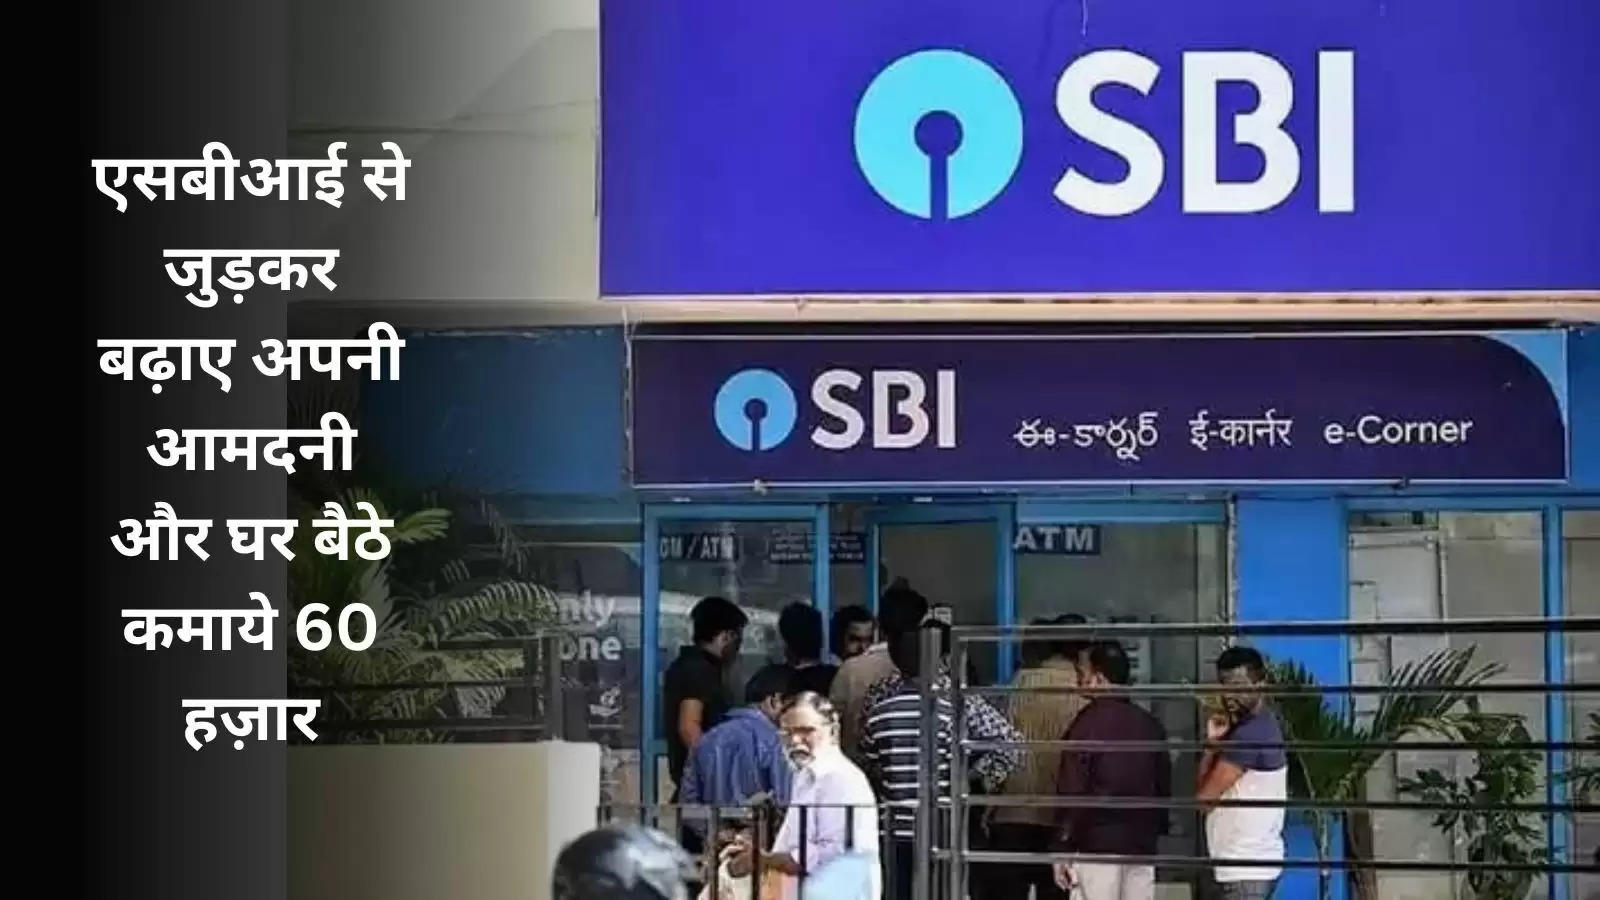 join-sbi-earn-60000-rupees-month